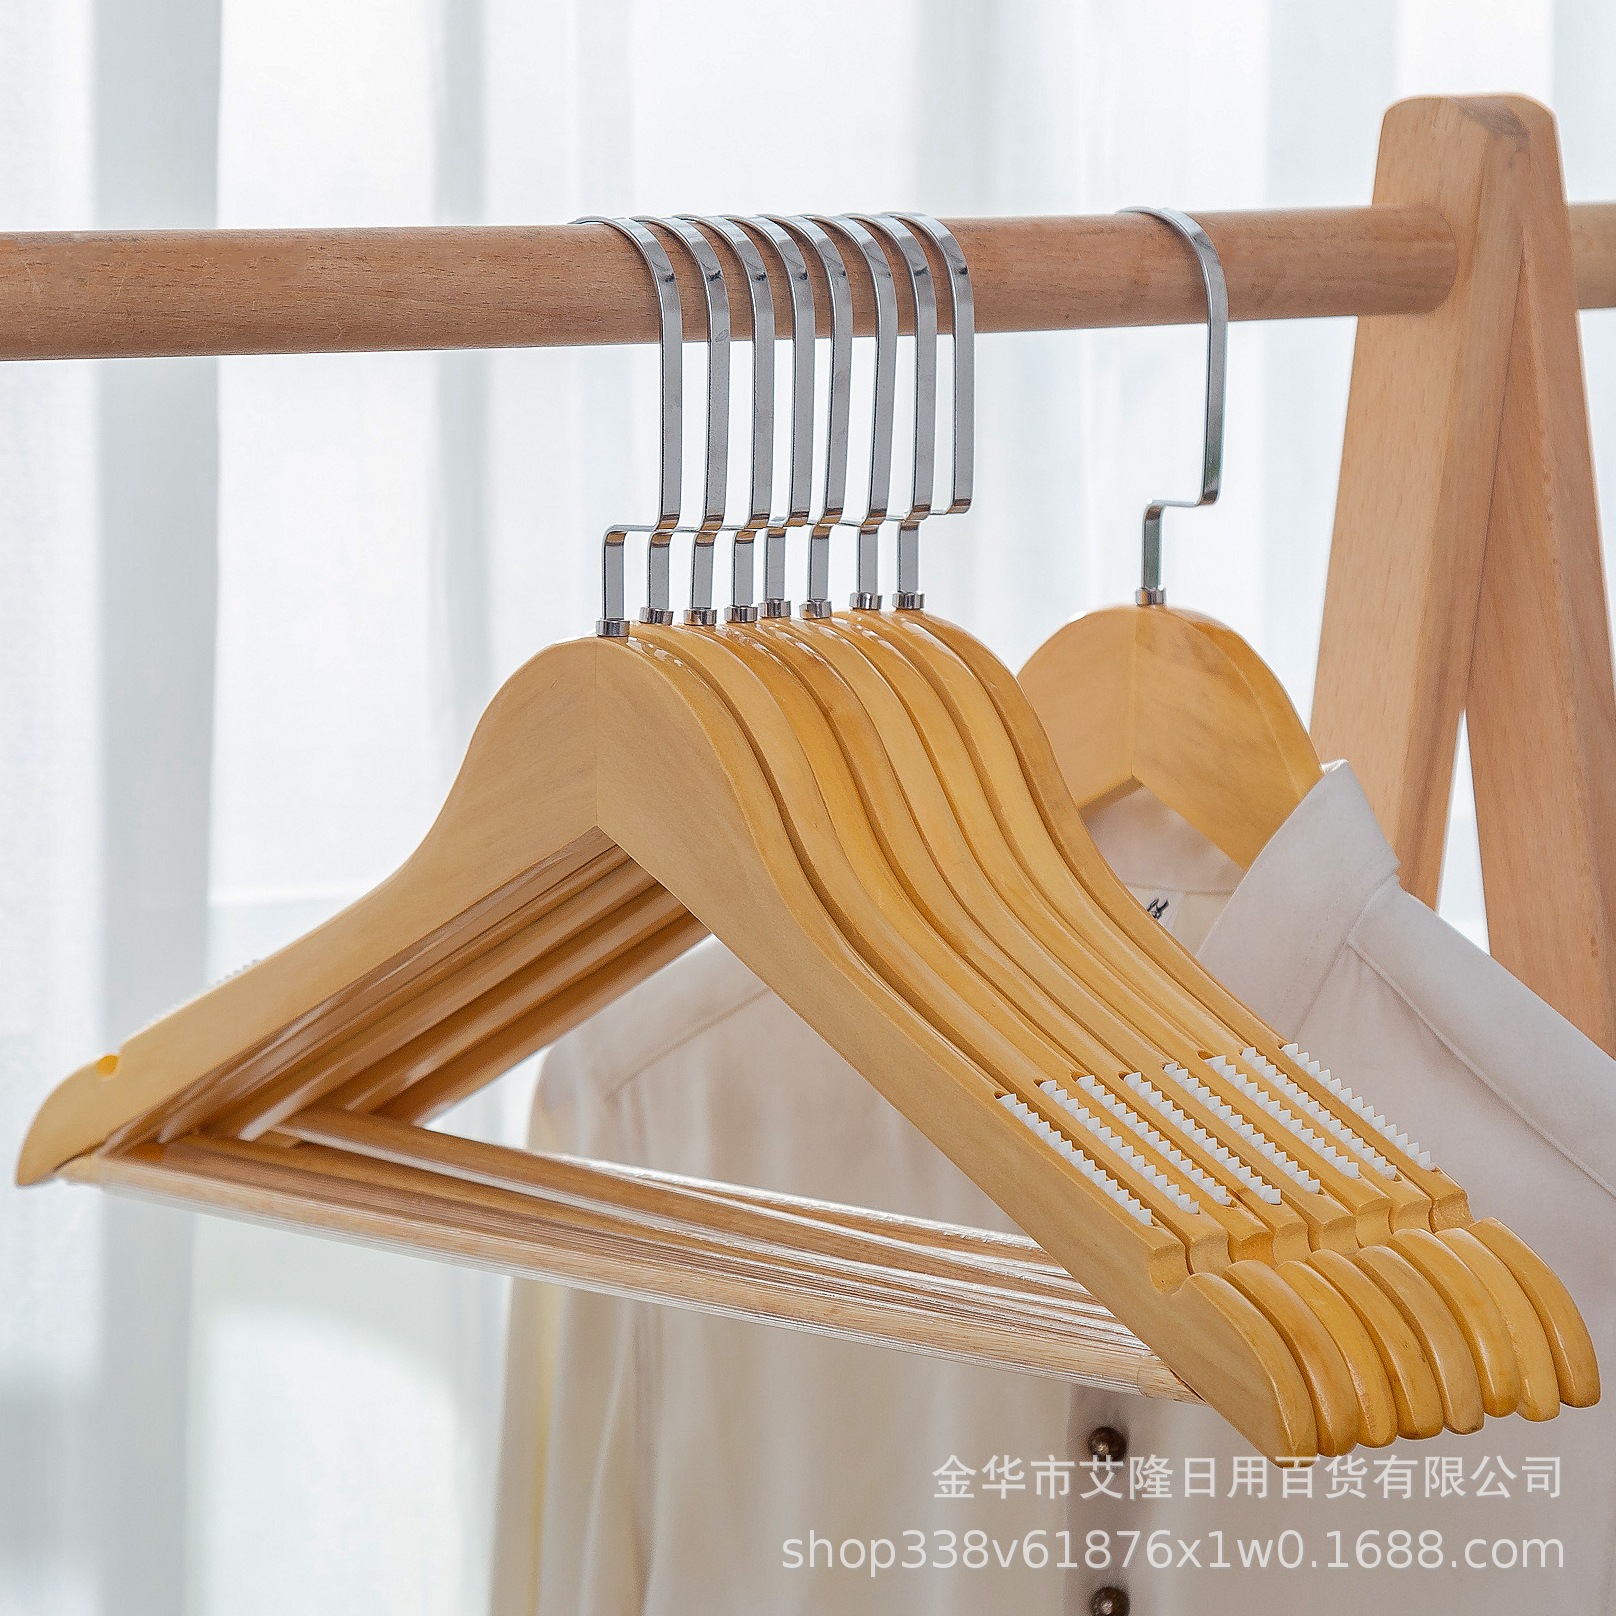 Non-Marking Clothes Hanging Clothes Hanger Wooden Clothes Hanger Clothing Store Hanger Clothes Hanger Solid Wood Non-Slip Wooden Hanger Wholesale